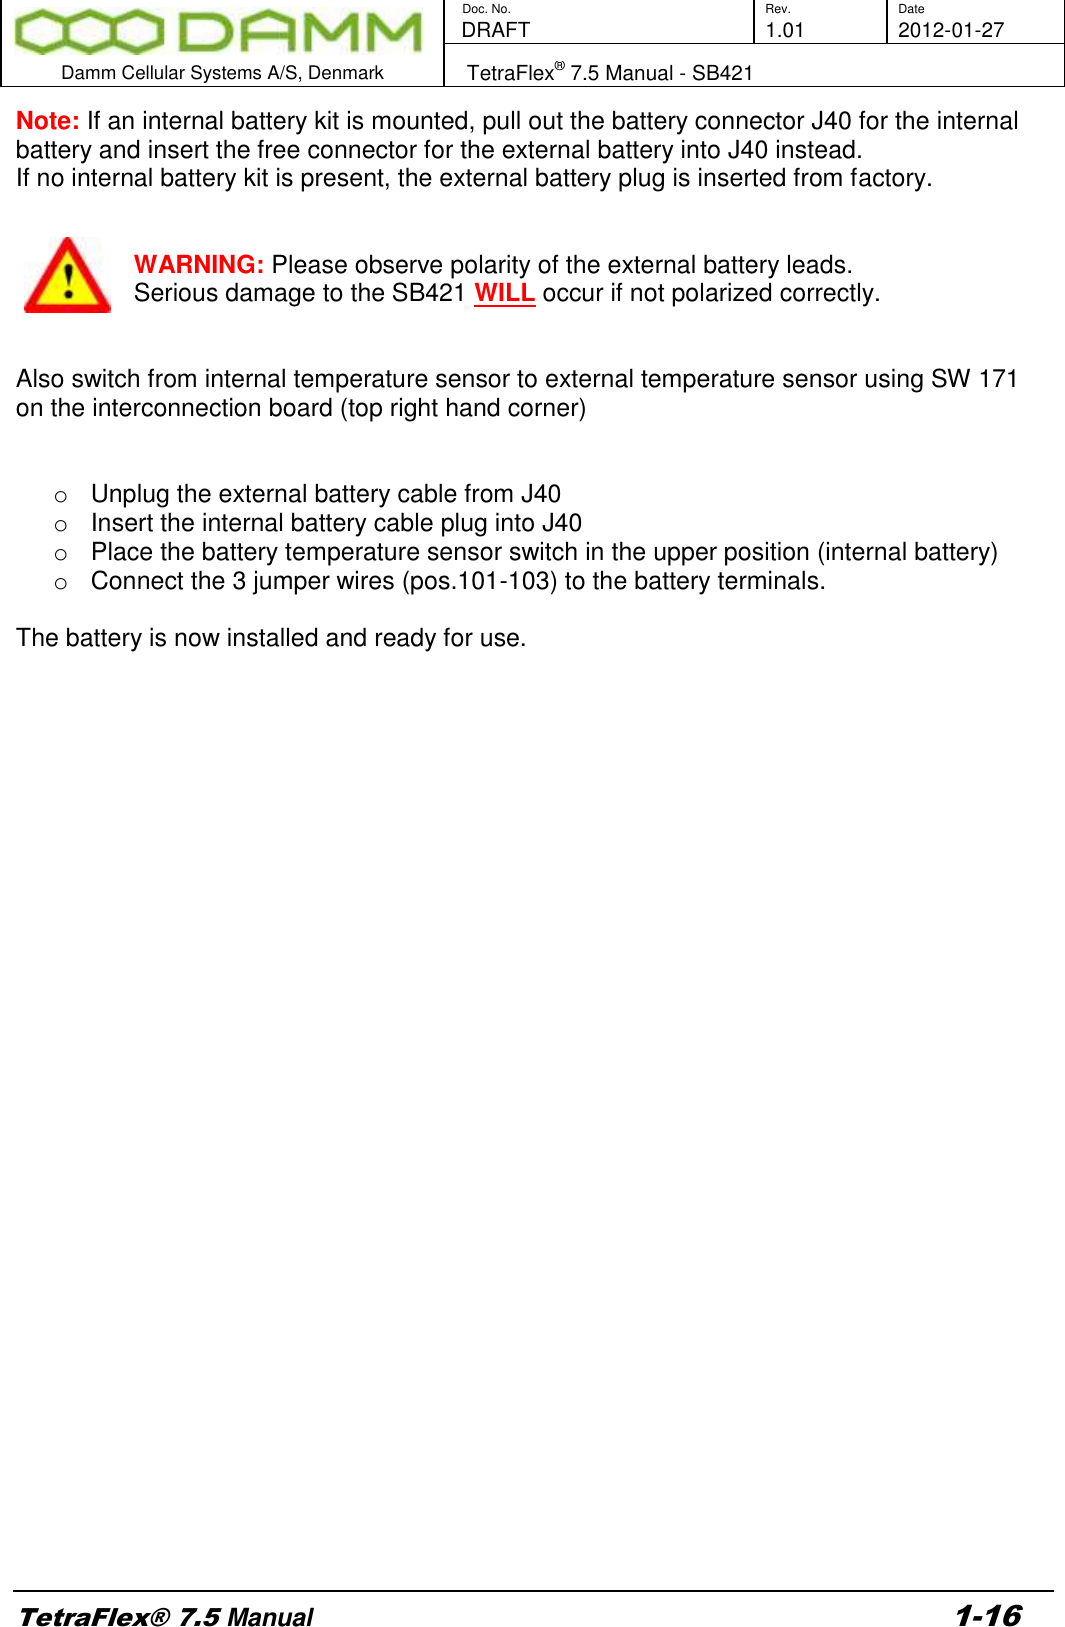        Doc. No. Rev. Date    DRAFT  1.01 2012-01-27  Damm Cellular Systems A/S, Denmark   TetraFlex® 7.5 Manual - SB421  TetraFlex® 7.5 Manual 1-16 Note: If an internal battery kit is mounted, pull out the battery connector J40 for the internal battery and insert the free connector for the external battery into J40 instead. If no internal battery kit is present, the external battery plug is inserted from factory.   WARNING: Please observe polarity of the external battery leads.  Serious damage to the SB421 WILL occur if not polarized correctly.   Also switch from internal temperature sensor to external temperature sensor using SW 171 on the interconnection board (top right hand corner)   o  Unplug the external battery cable from J40 o  Insert the internal battery cable plug into J40 o  Place the battery temperature sensor switch in the upper position (internal battery) o  Connect the 3 jumper wires (pos.101-103) to the battery terminals.   The battery is now installed and ready for use.     